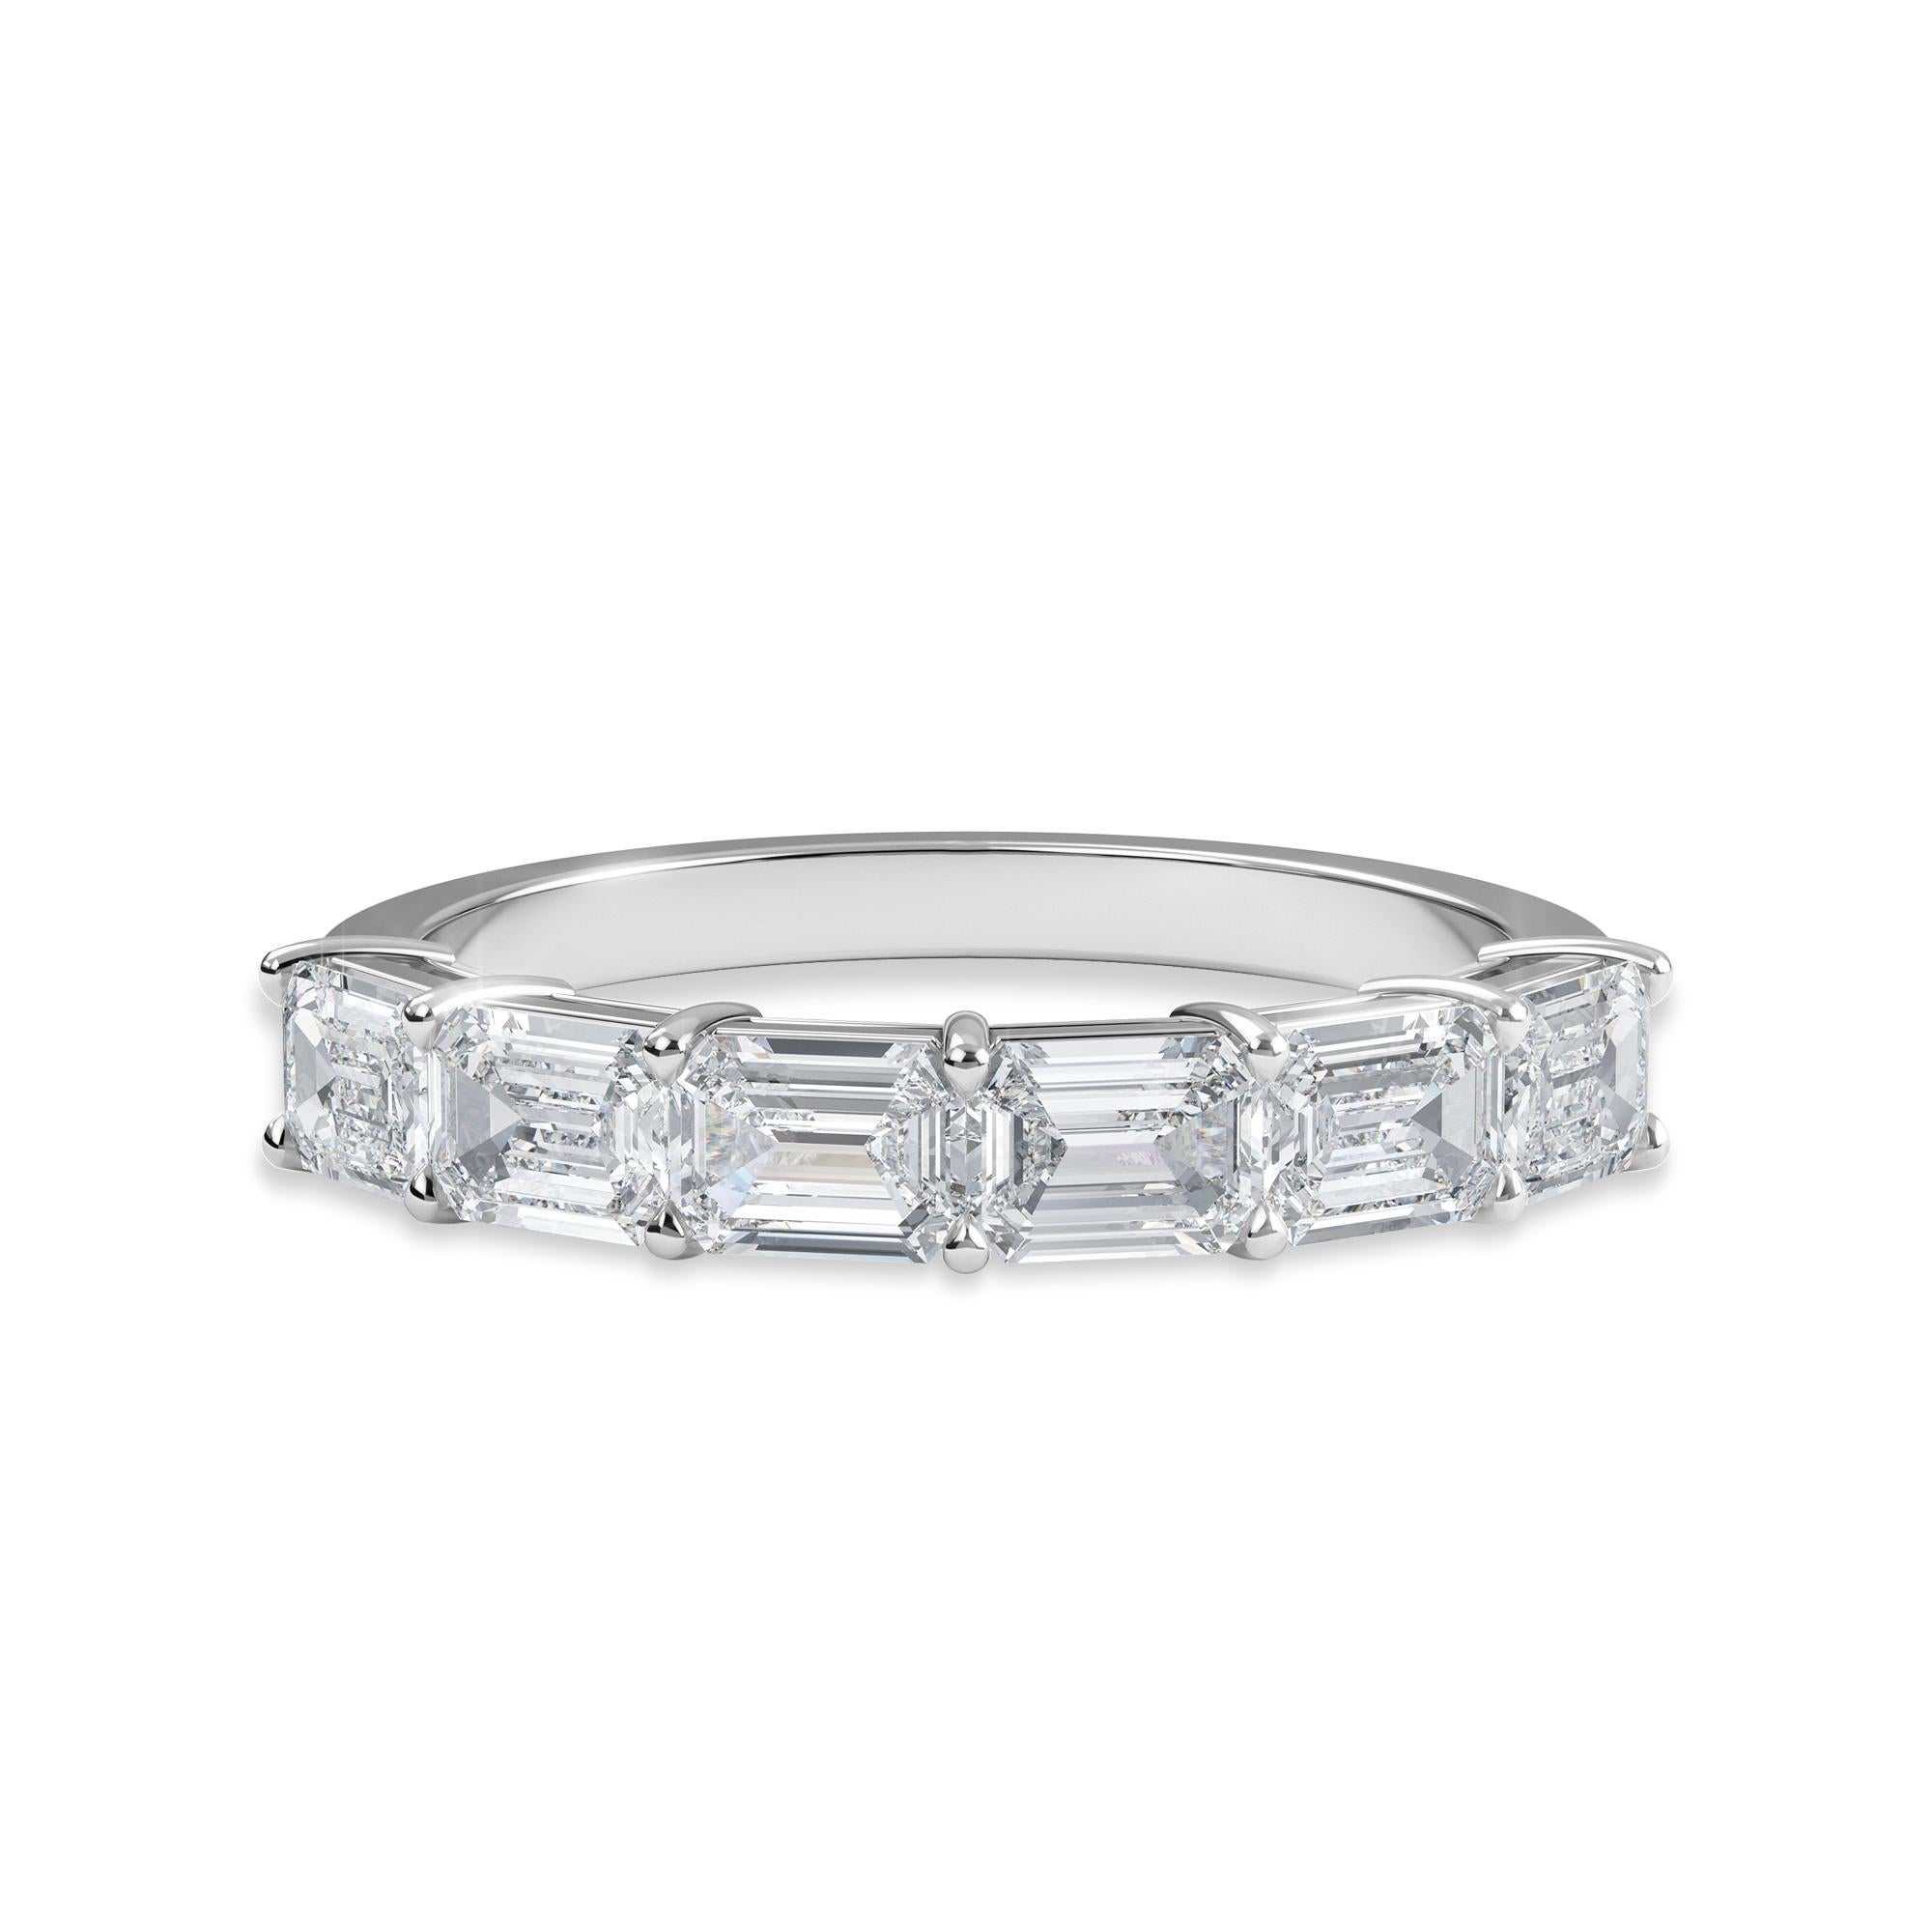 This ring has Emerald Cut Diamonds, set Horizontal. The ring has 6 Diamonds with a Total Carat Weight of 1.81.
The diamonds are I-J Color, VS Clarity. The ring is a finger size 6.5 and is set in Platinum.

Message us for additional finger size